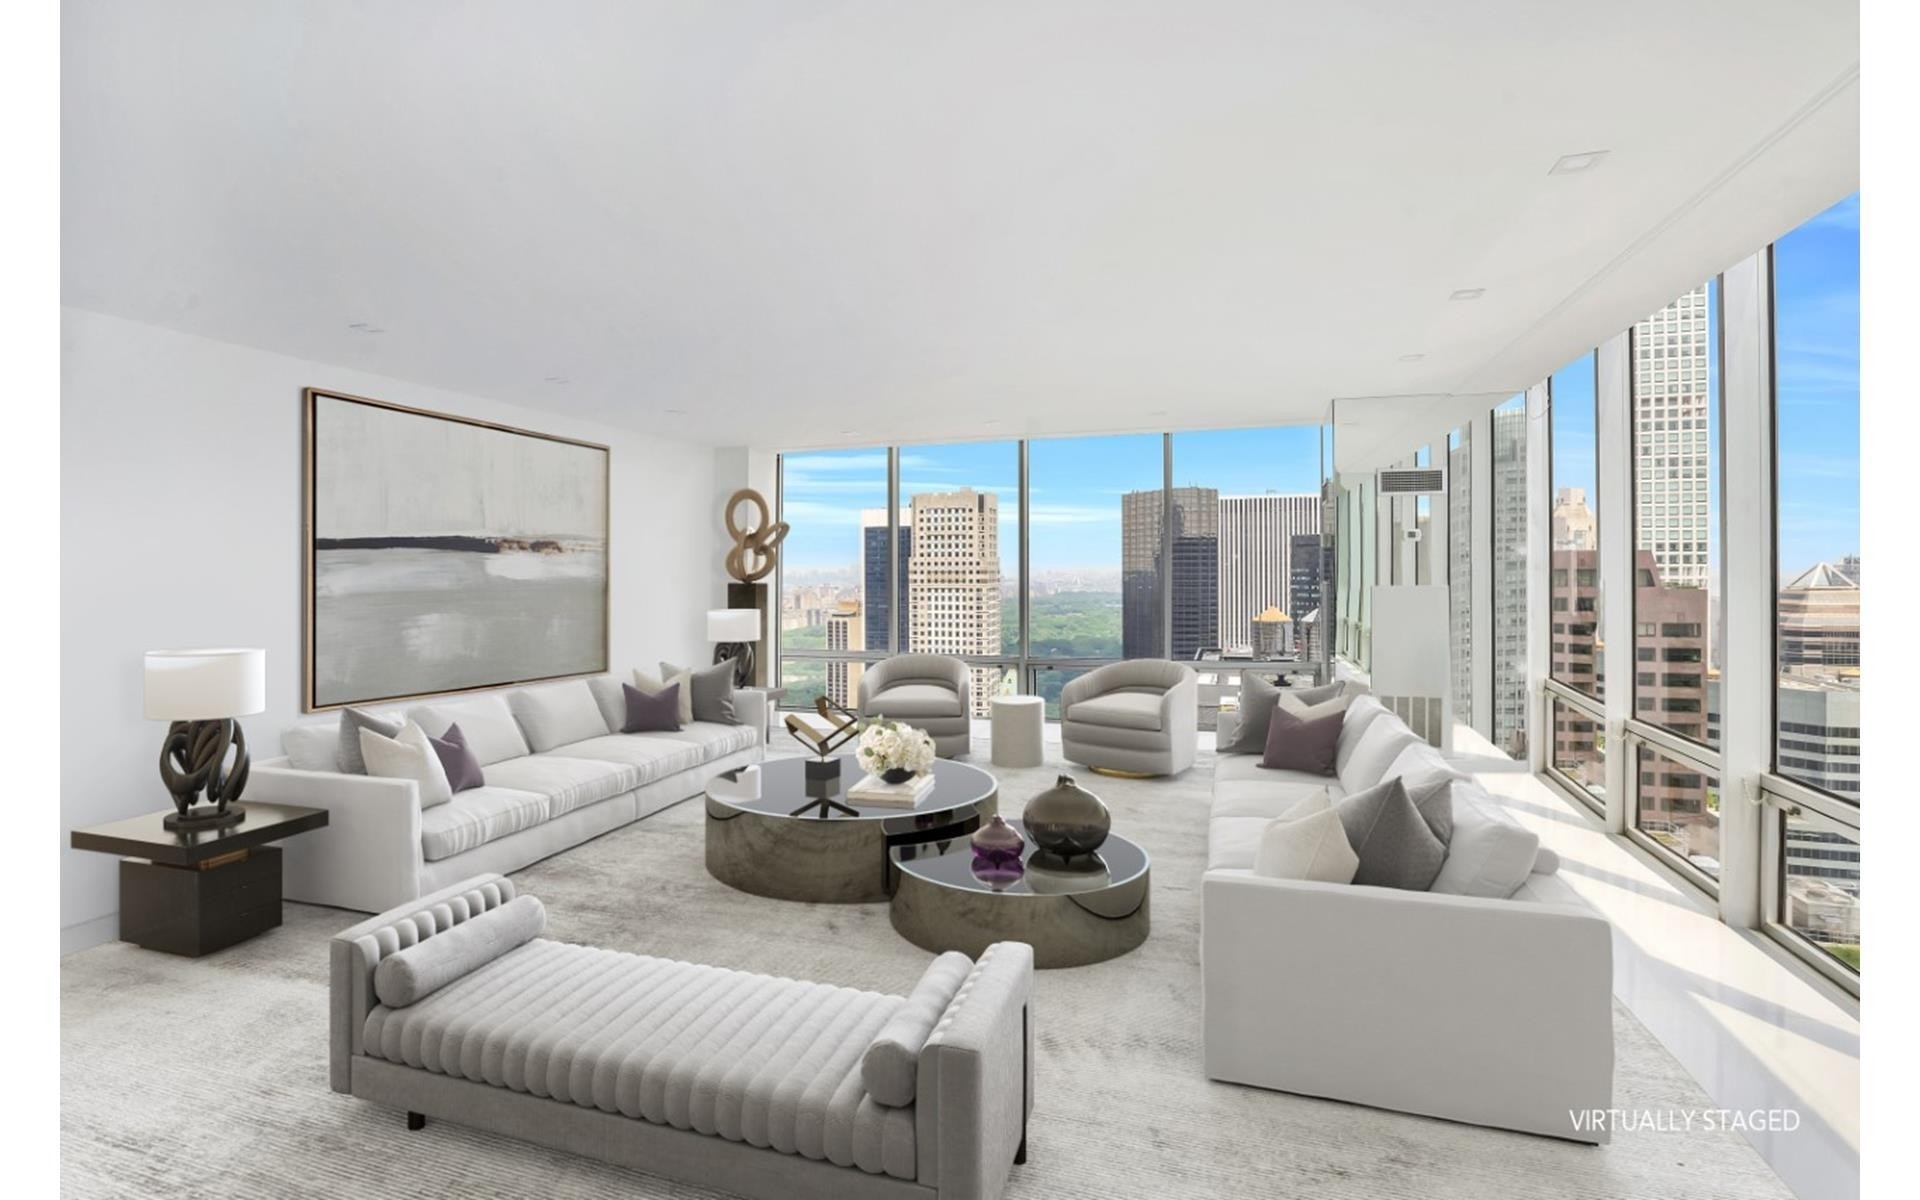 Condominium for Sale at Olympic Tower, 641 FIFTH AVE , 46/47C Turtle Bay, New York, New York 10022